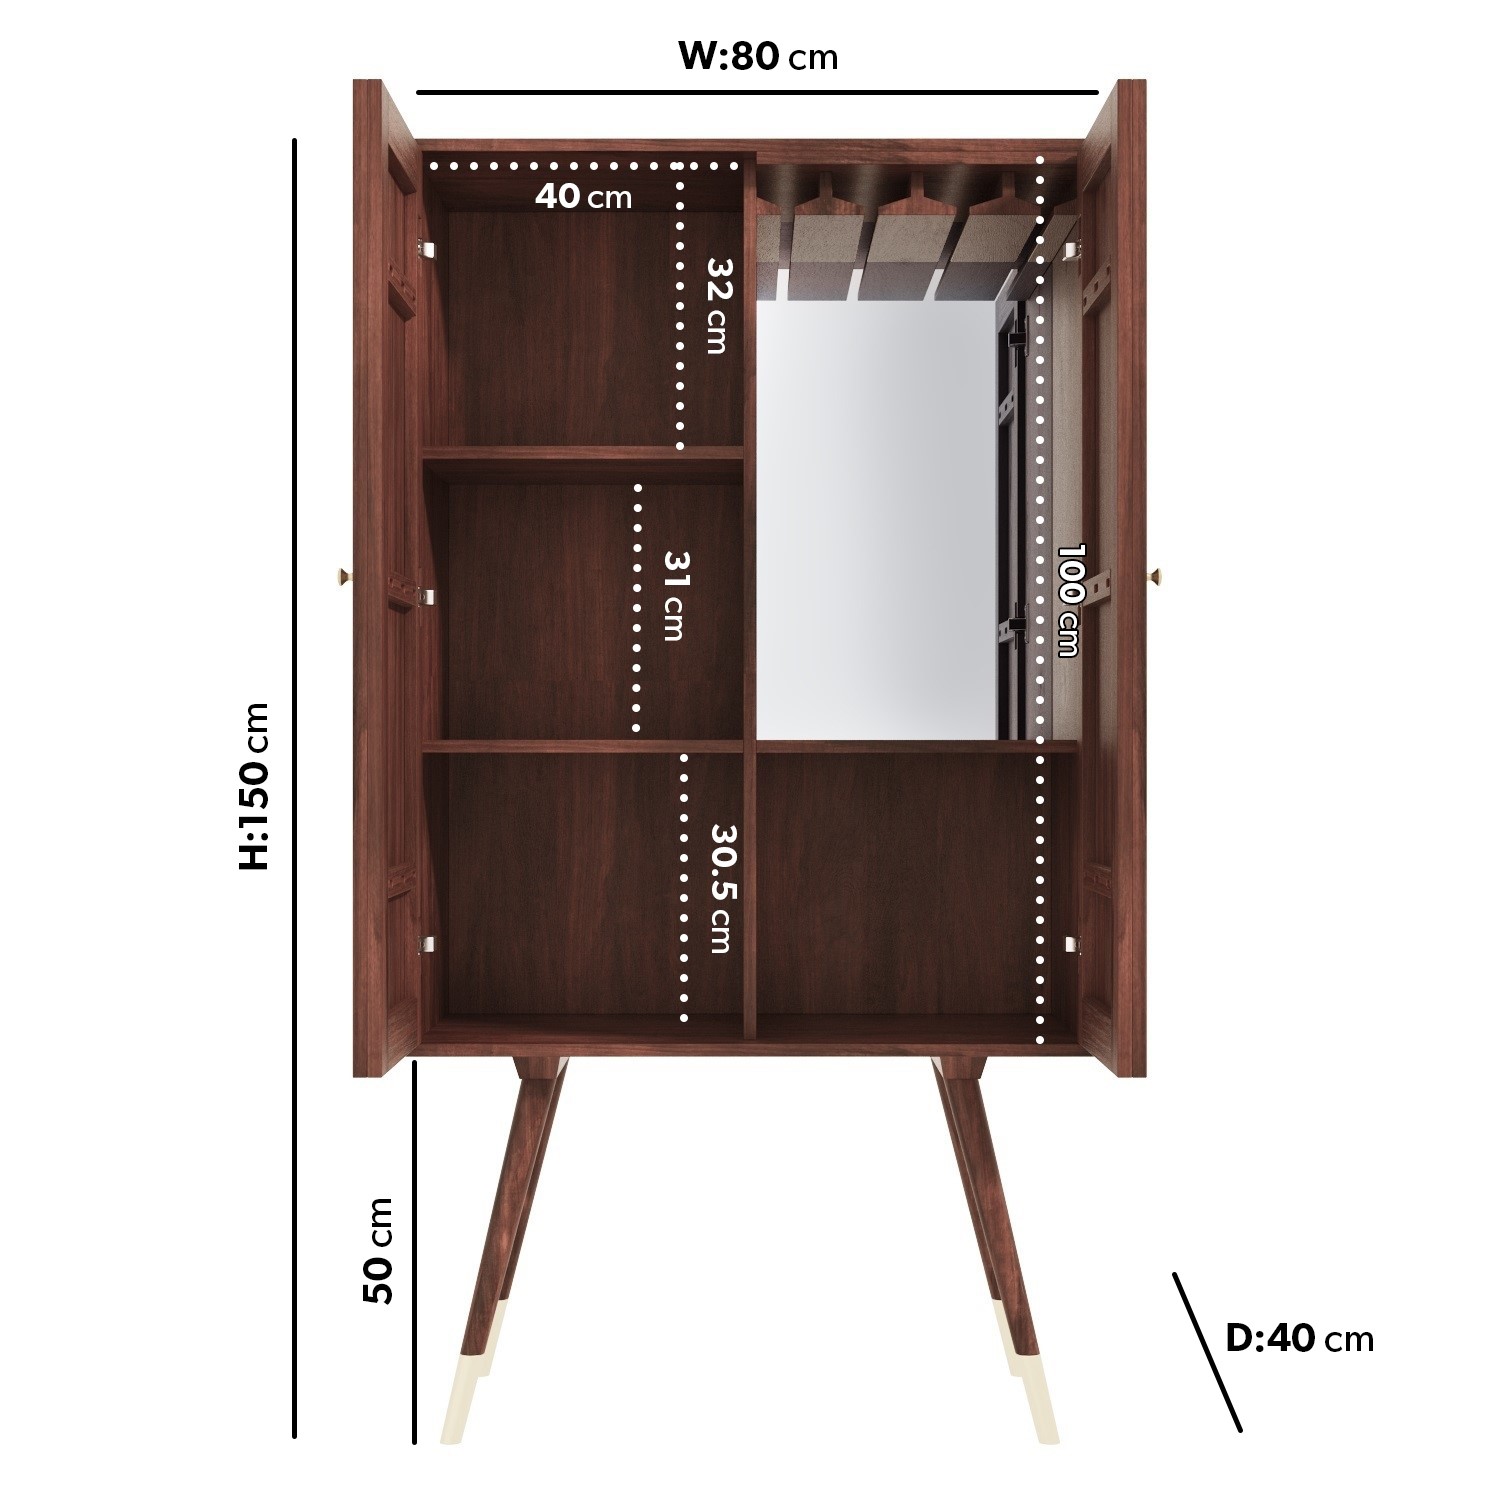 Read more about Tall solid mango wood drinks cabinet with wine rack dejan